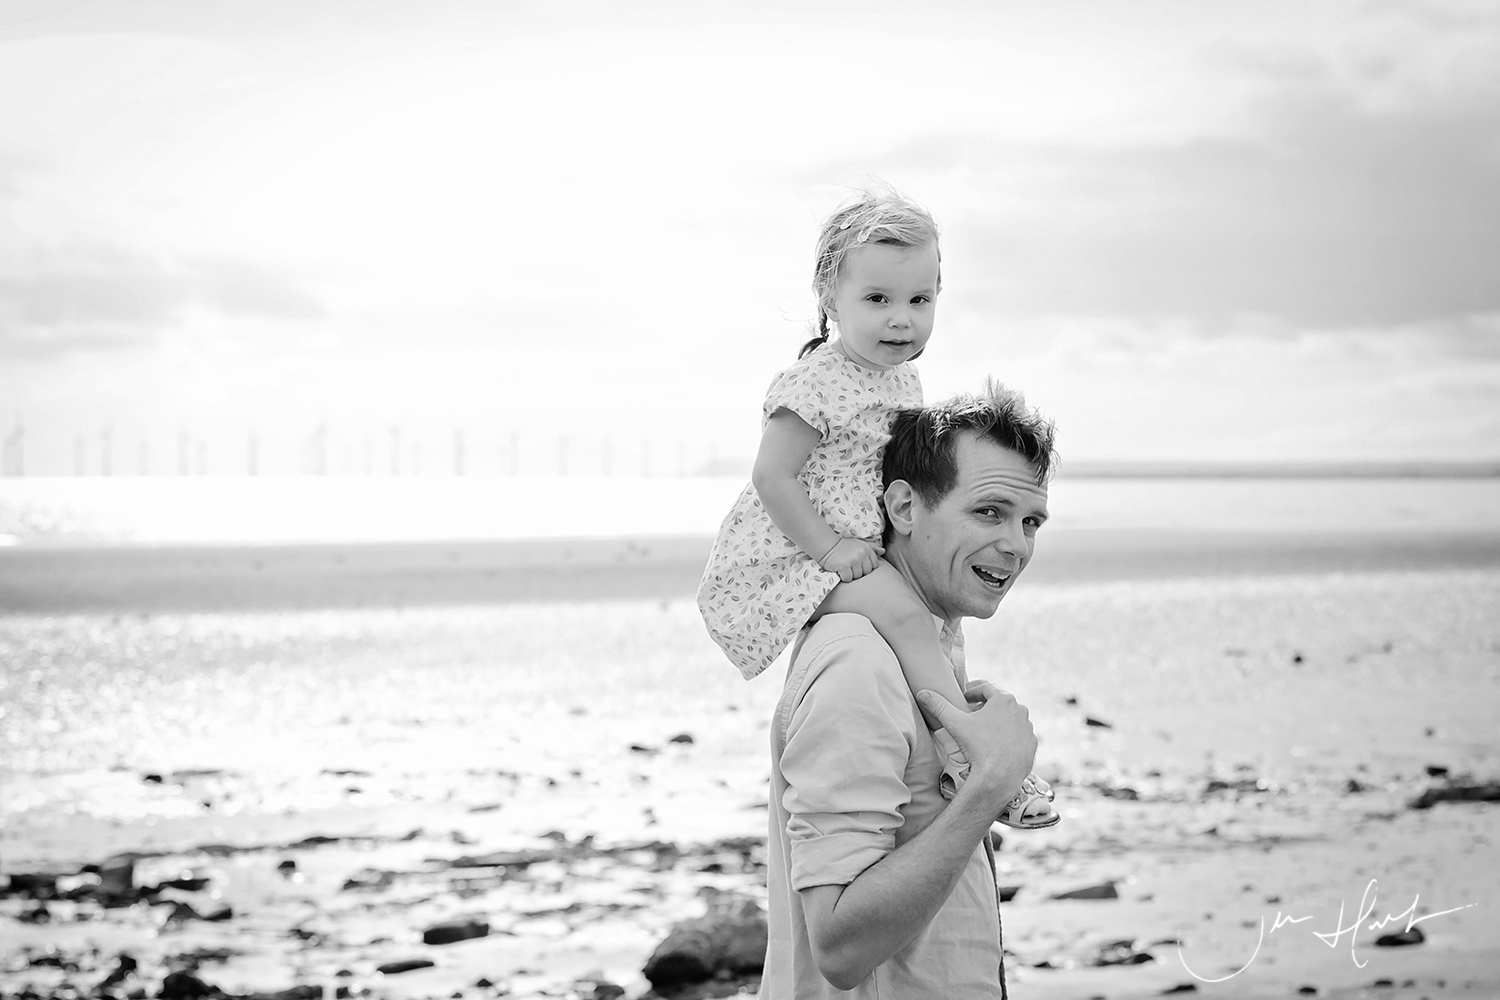 Family-Location-Photography-Middlesbrough-Jen-Hart-Martha-22August18_006-BW